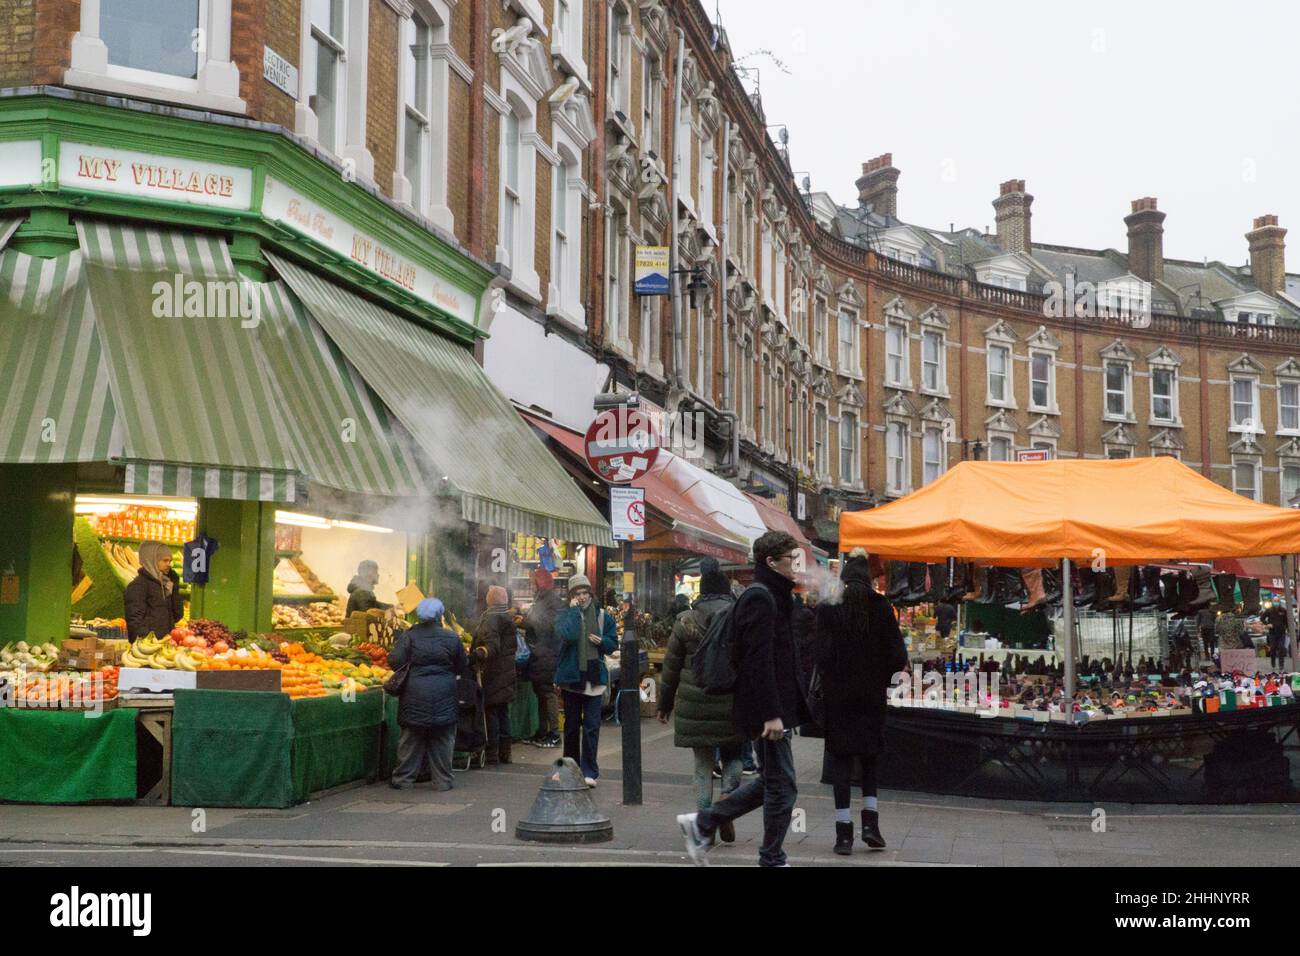 London, UK, 25 January 2022: On Electric Avenue in Brixton people buy groceries from shops and market stalls that cater to the diversity of the local population. The cost of basic foods has risen sharply and there are fears of how the cost of living crisis will affect poorer households all around the country. Anna Watson/Alamy Live News Stock Photo